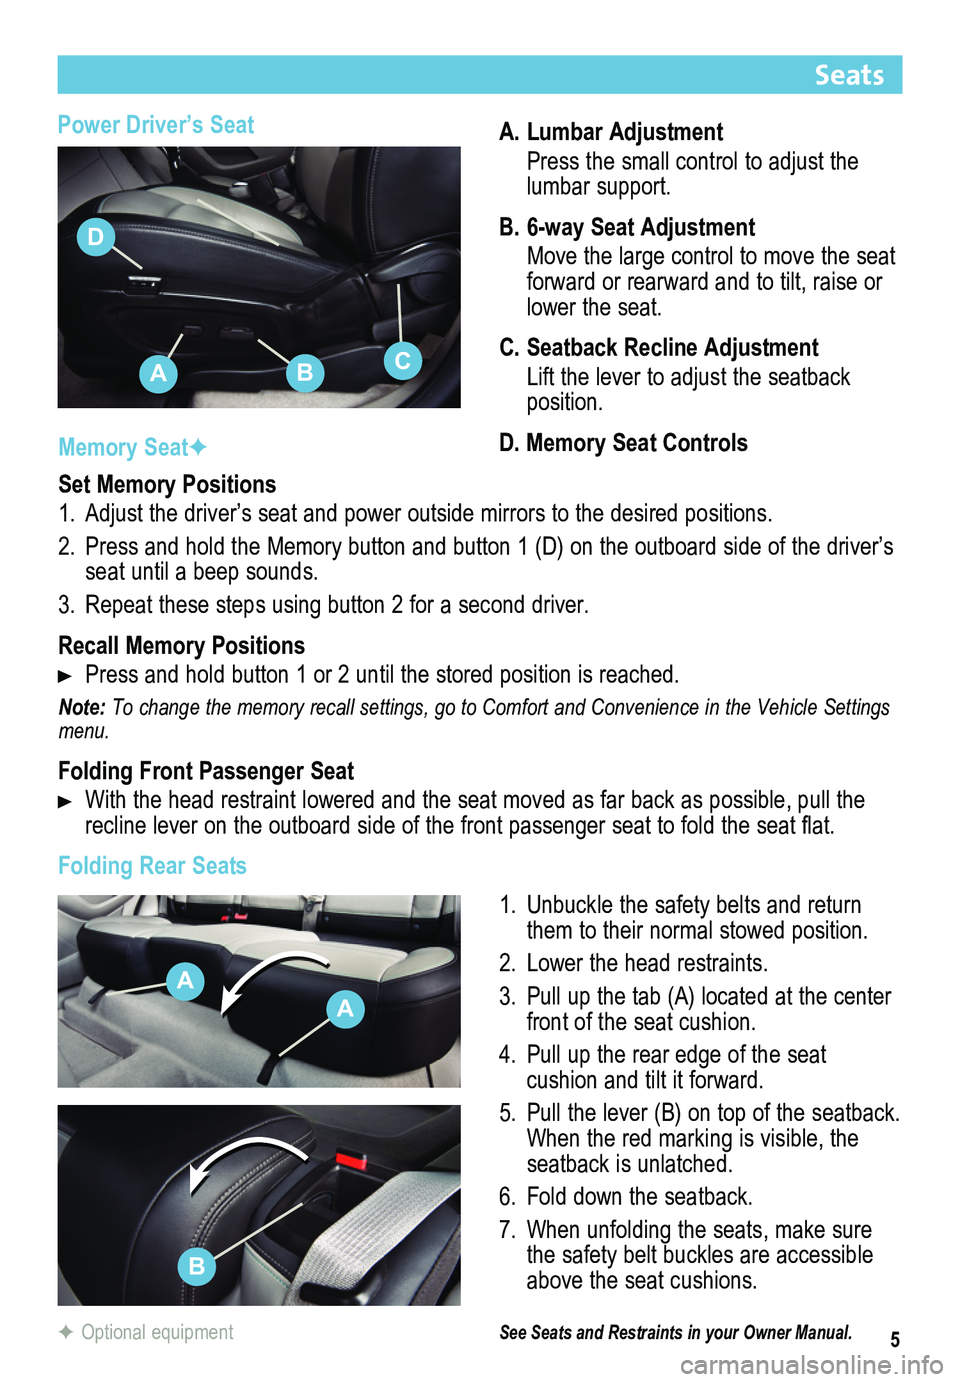 BUICK ENCORE 2014  Get To Know Guide 5
Power Driver’s SeatA. Lumbar Adjustment
 Press the small control to adjust the lumbar support.
B. 6-way Seat Adjustment
 Move the large control to move the seat forward or rearward and to tilt, ra